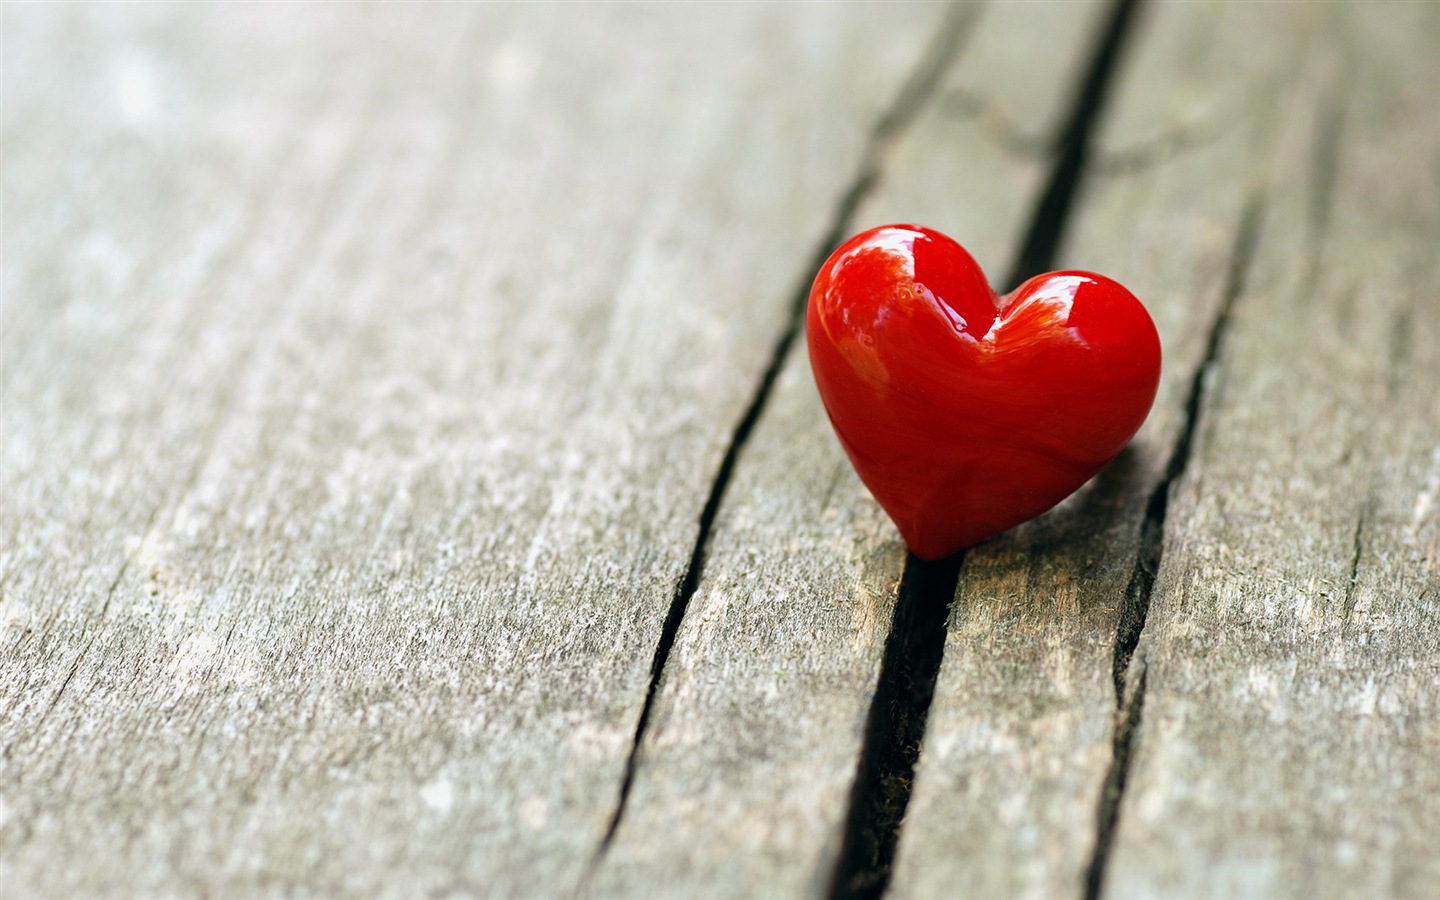 The theme of love, creative heart-shaped HD wallpapers #9 - 1440x900